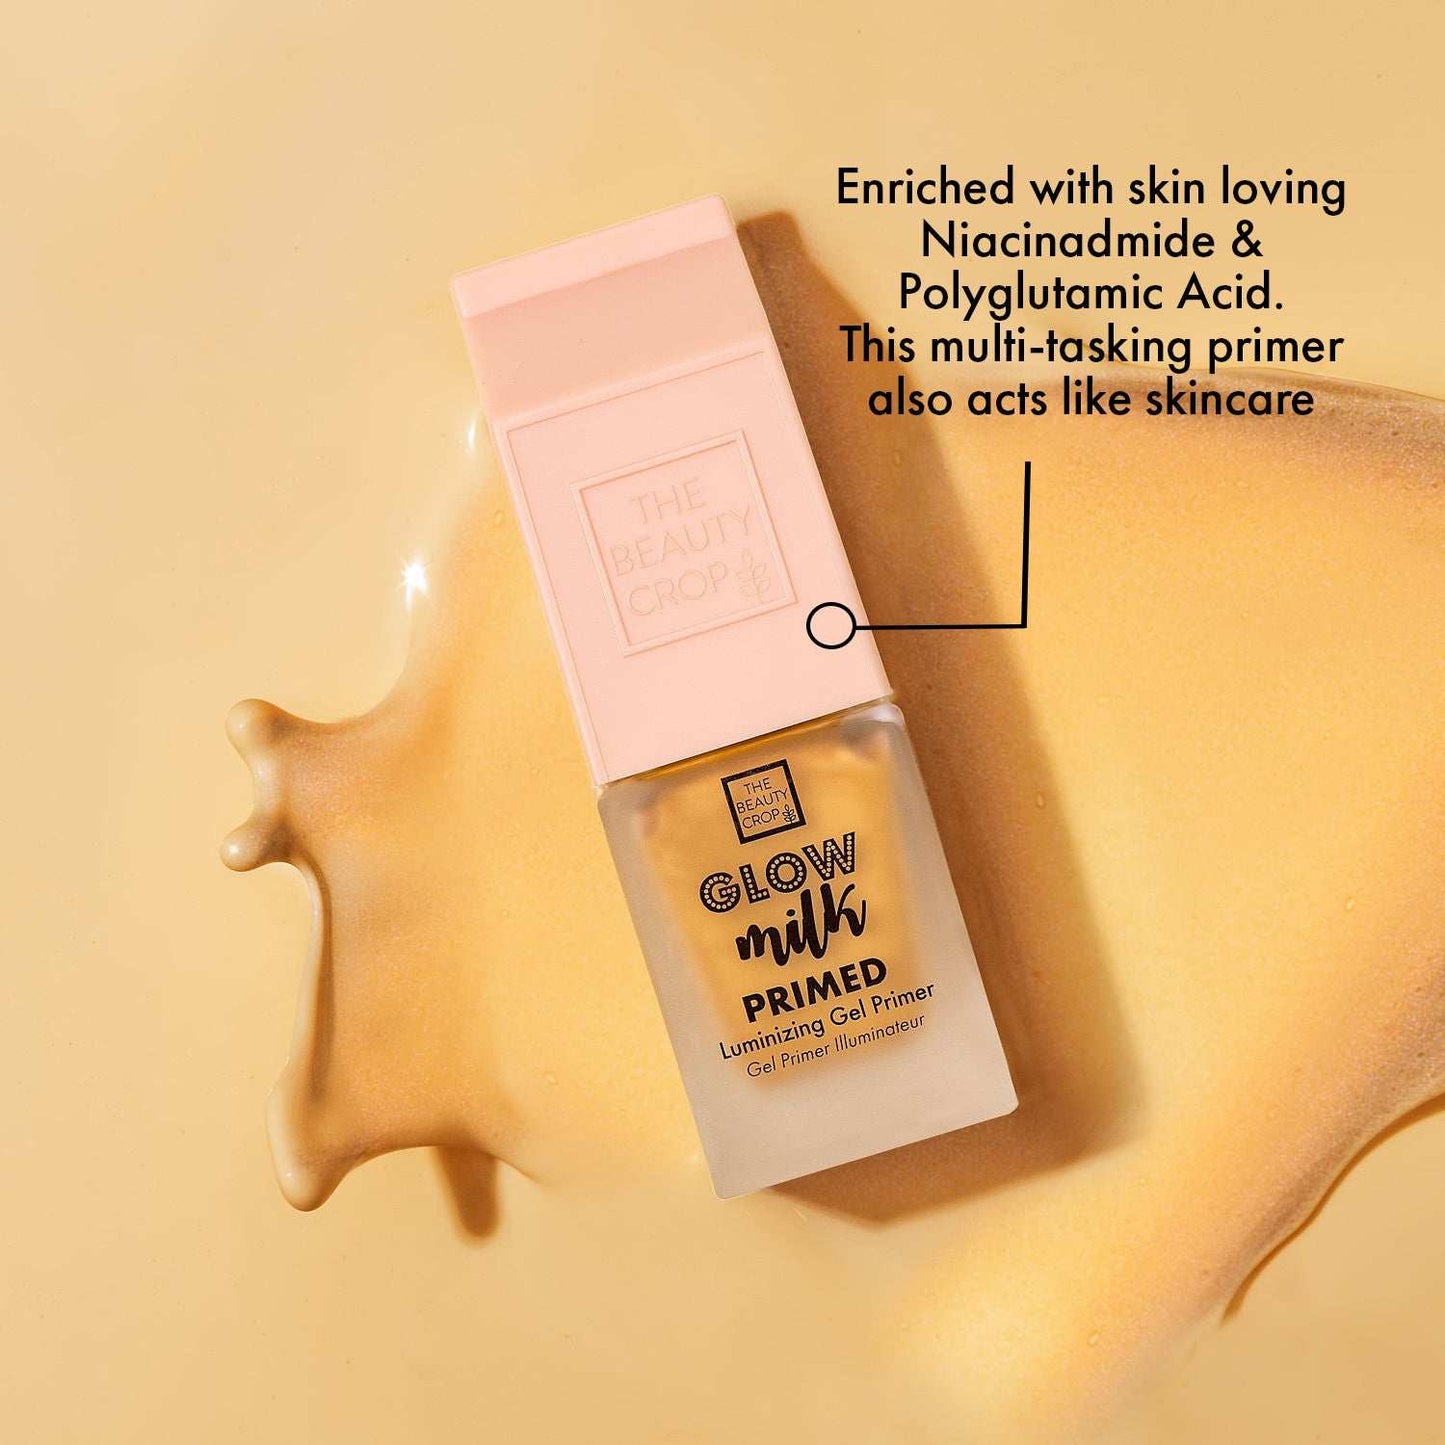 Enriched with skin loving Niacinadmide & Polyglutamic Acid. This multi-tasking primer also acts like skincare